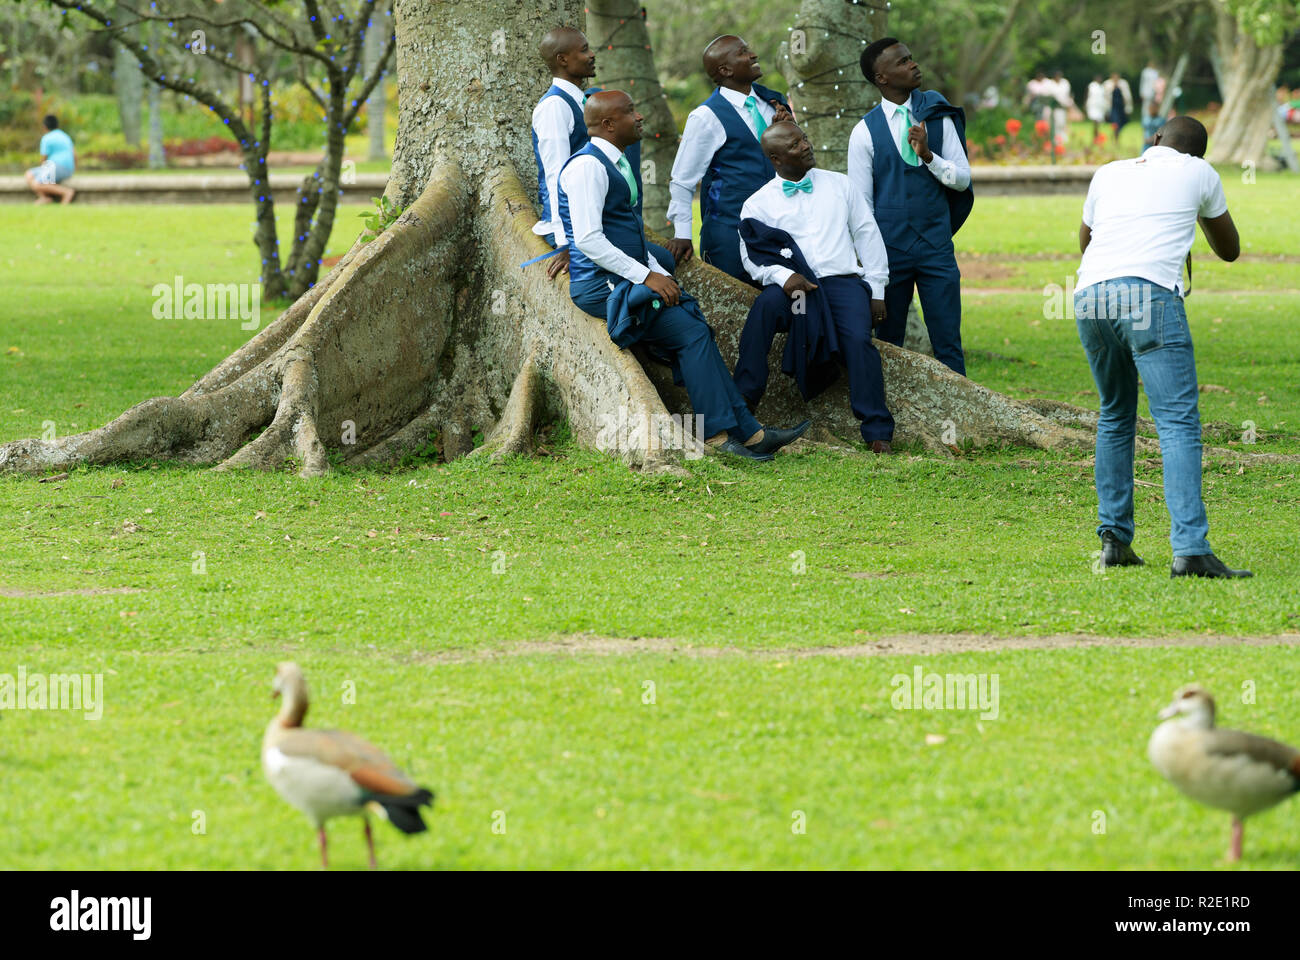 Durban, KwaZulu-Natal, South Afirca, group of five adult men being photographed by wedding photographer doing Blue Steel pose, Botanical Gardens Stock Photo